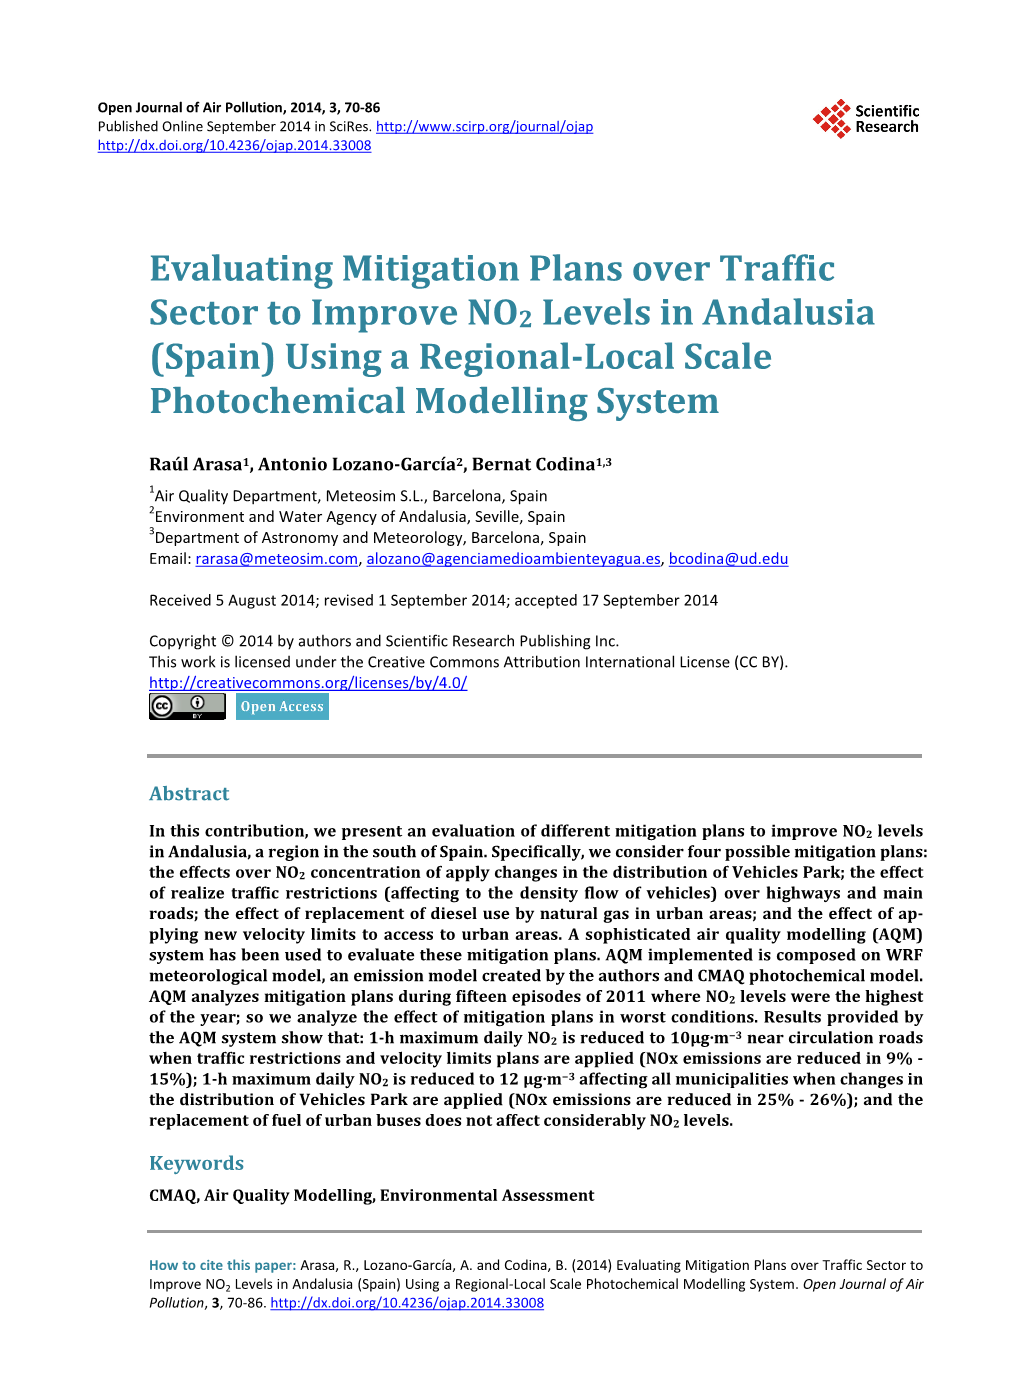 Evaluating Mitigation Plans Over Traffic Sector to Improve NO2 Levels in Andalusia (Spain) Using a Regional-Local Scale Photochemical Modelling System